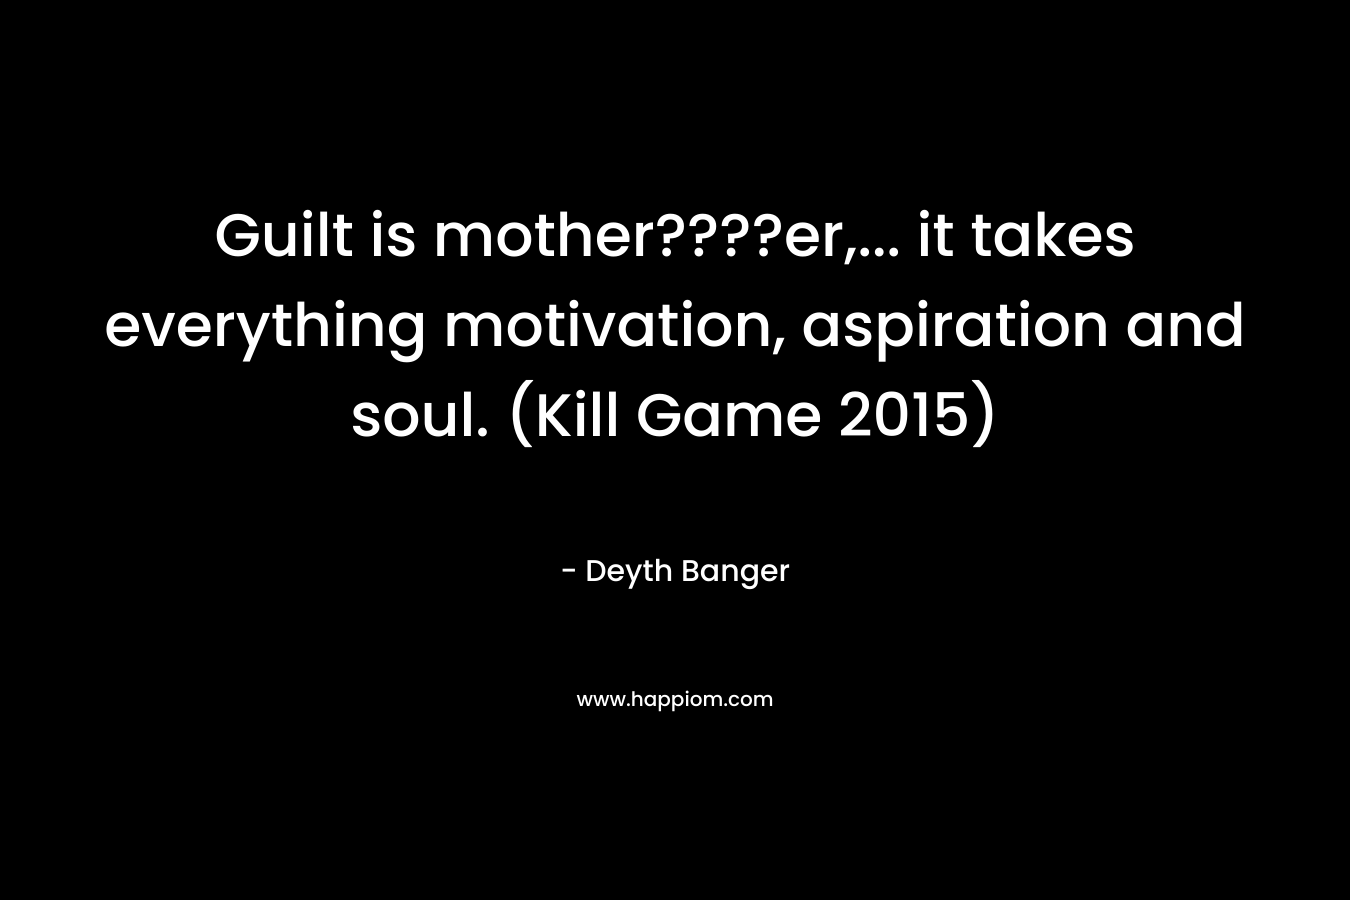 Guilt is mother????er,... it takes everything motivation, aspiration and soul. (Kill Game 2015)